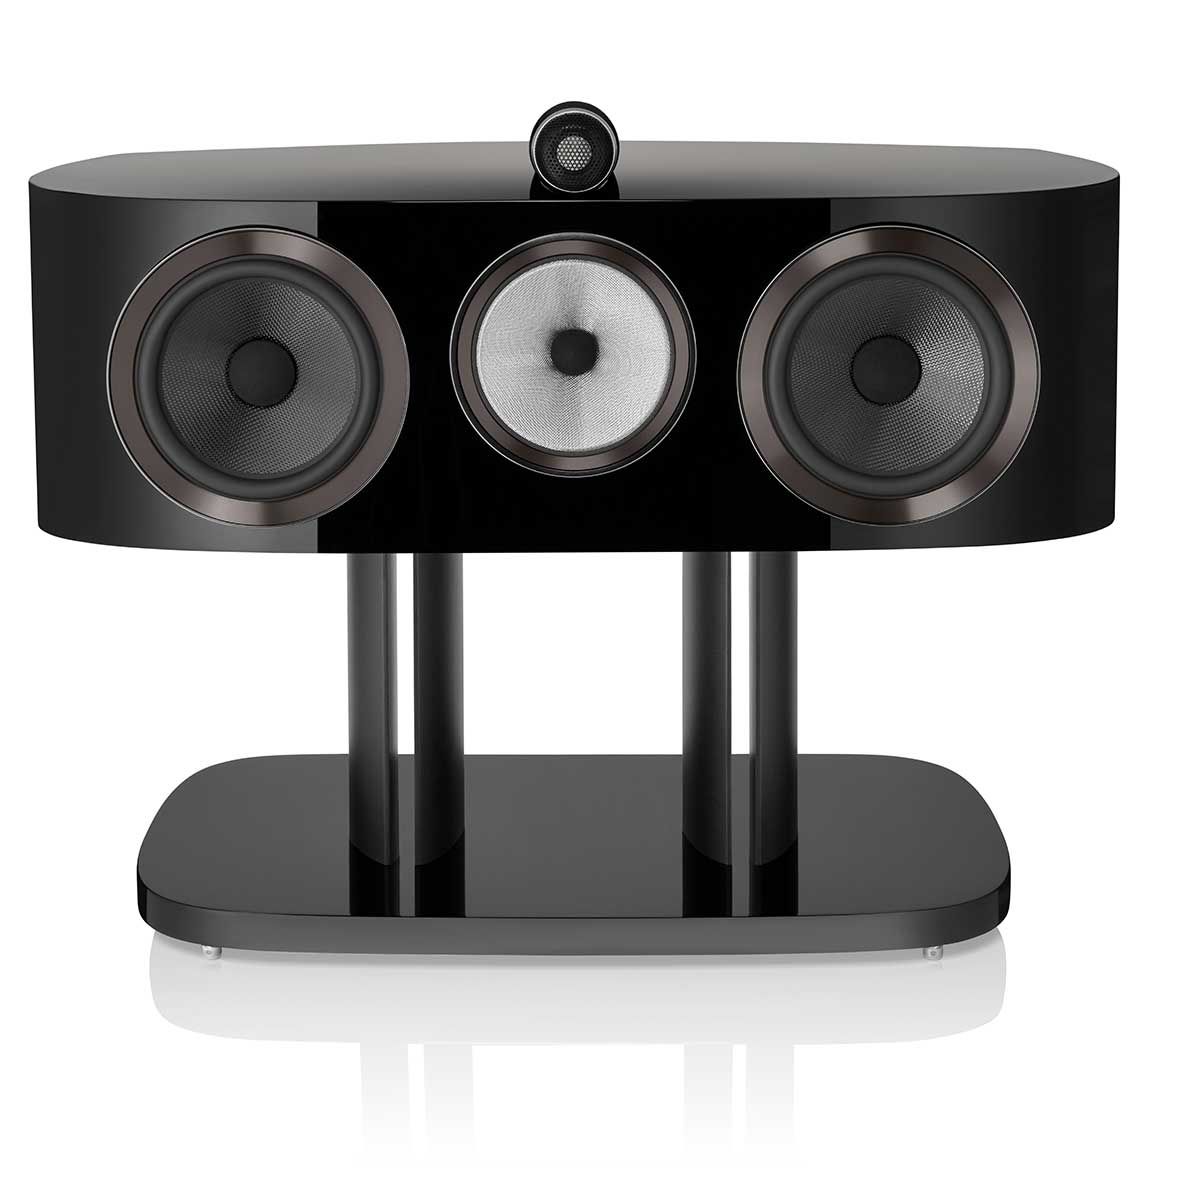 Bowers & Wilkins HTM81 D4 Center Channel Speaker, Gloss Black, front view without grille on stand